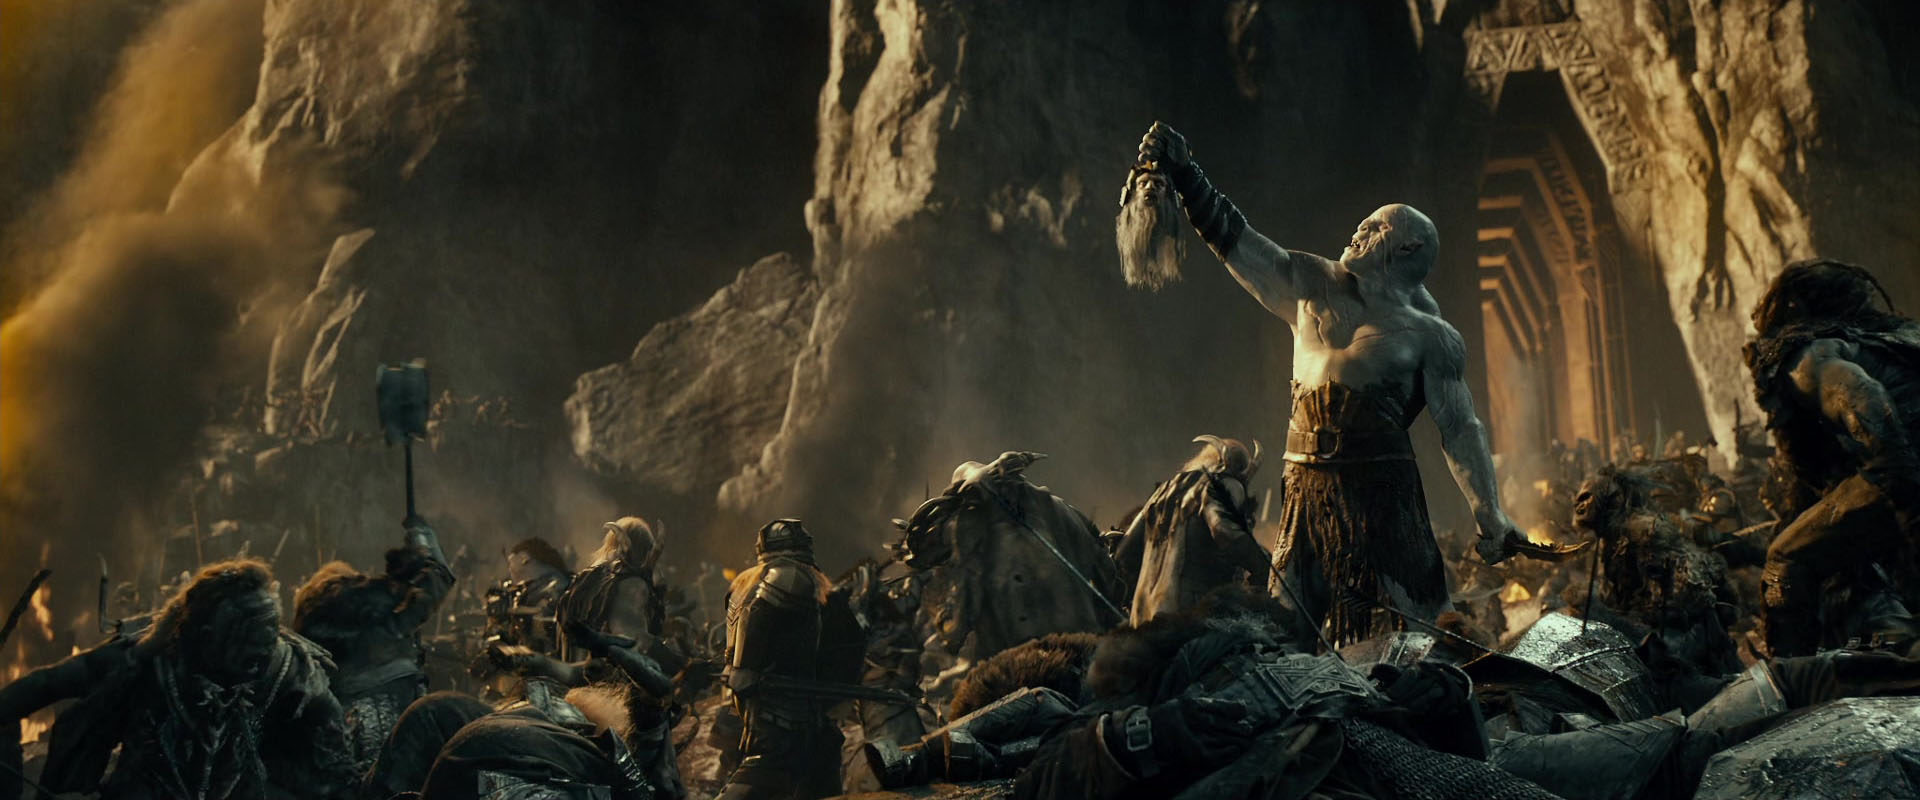 Moria/Rings of Power, Middle-earth Cinematic Universe wiki